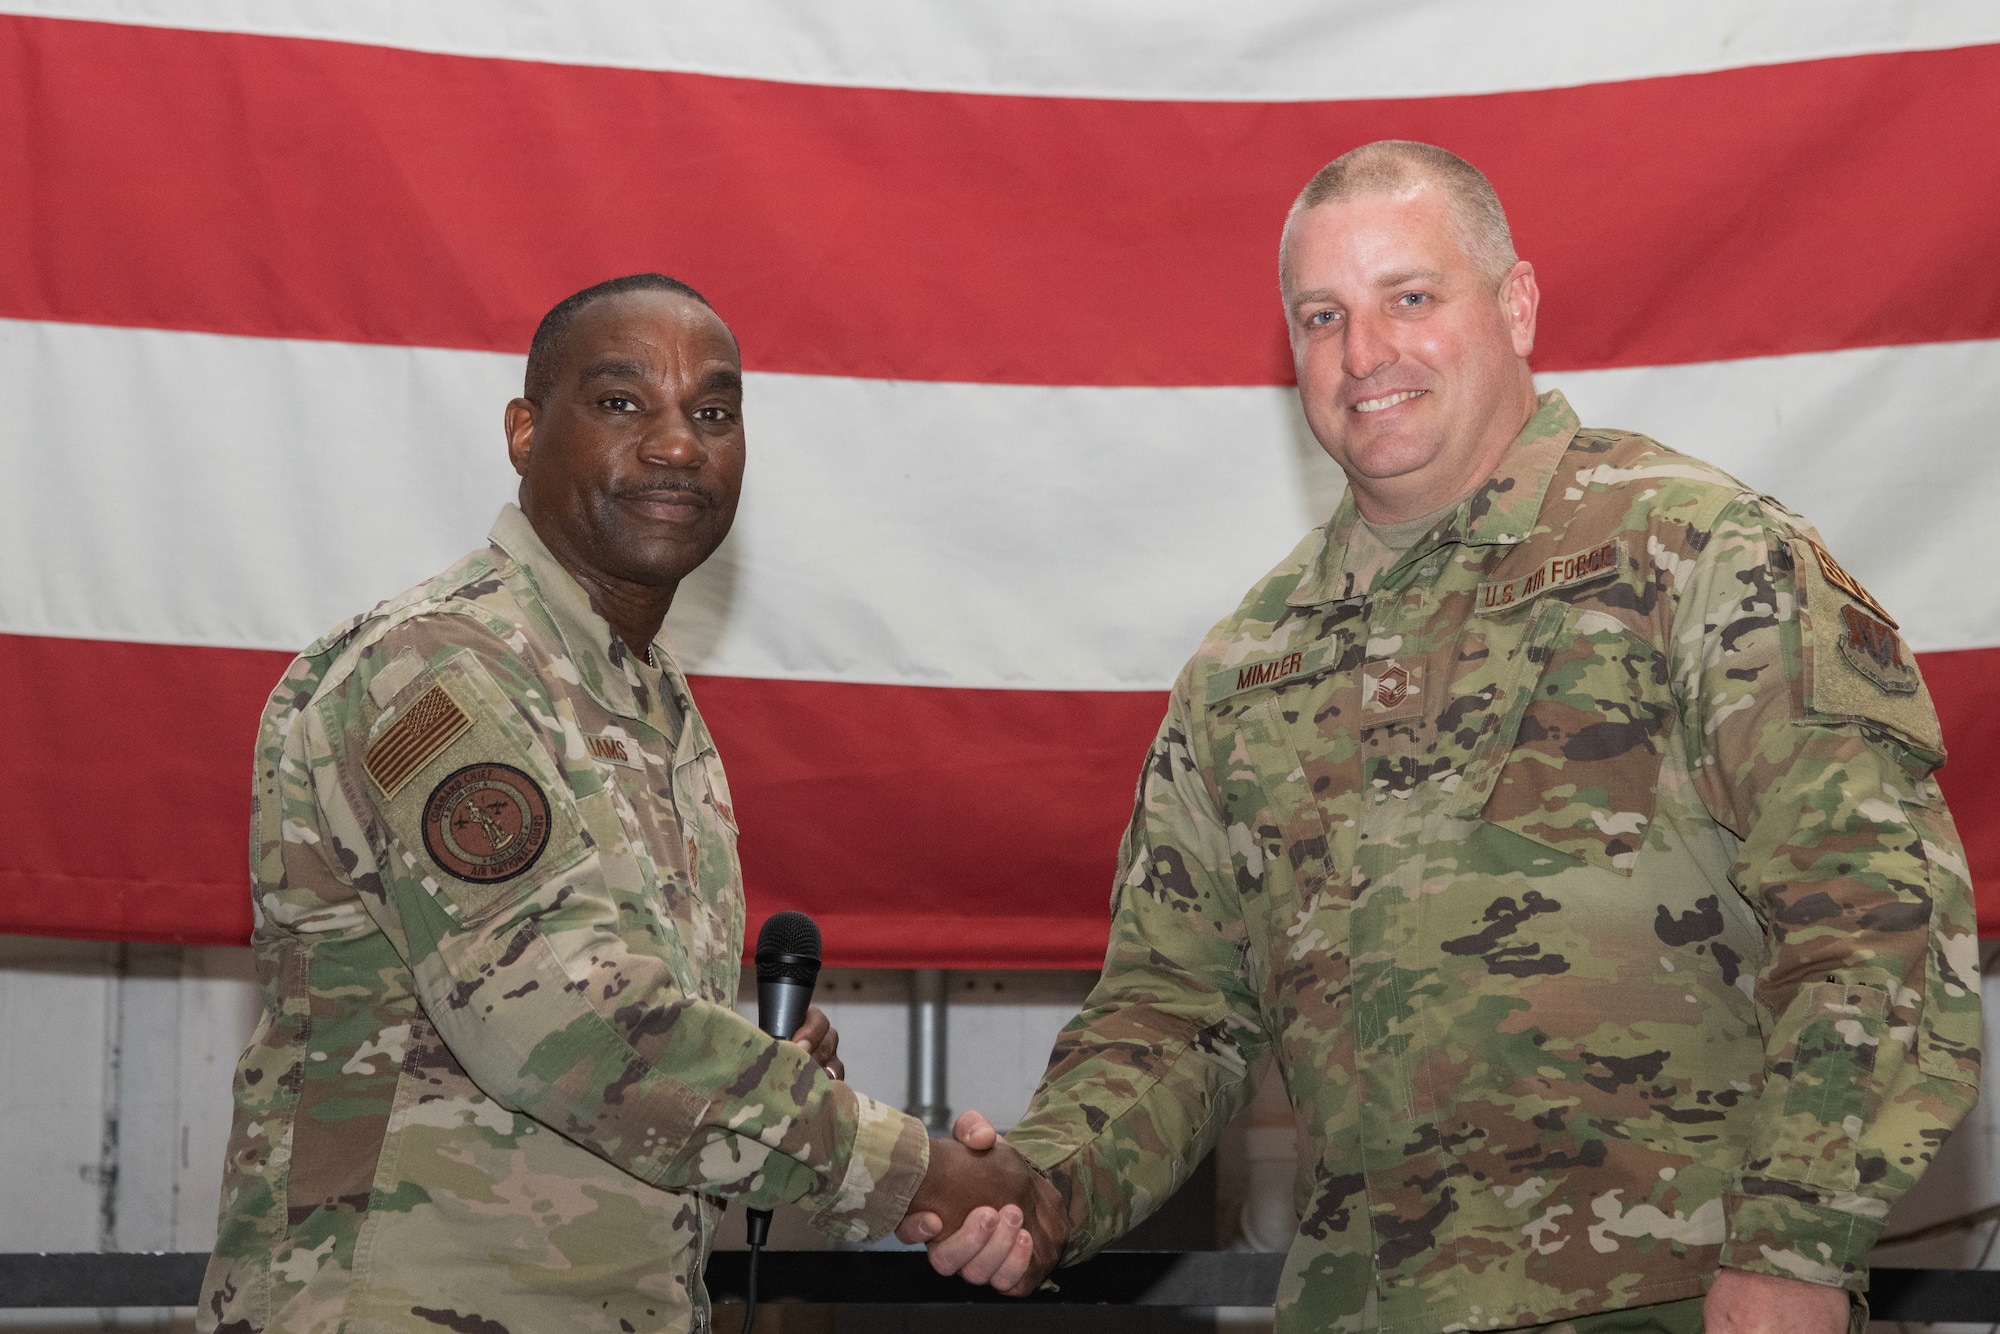 A photo of Chief Master Sgt. Maurice L. Williams coining Senior Master Sgt. Michael Mimler.